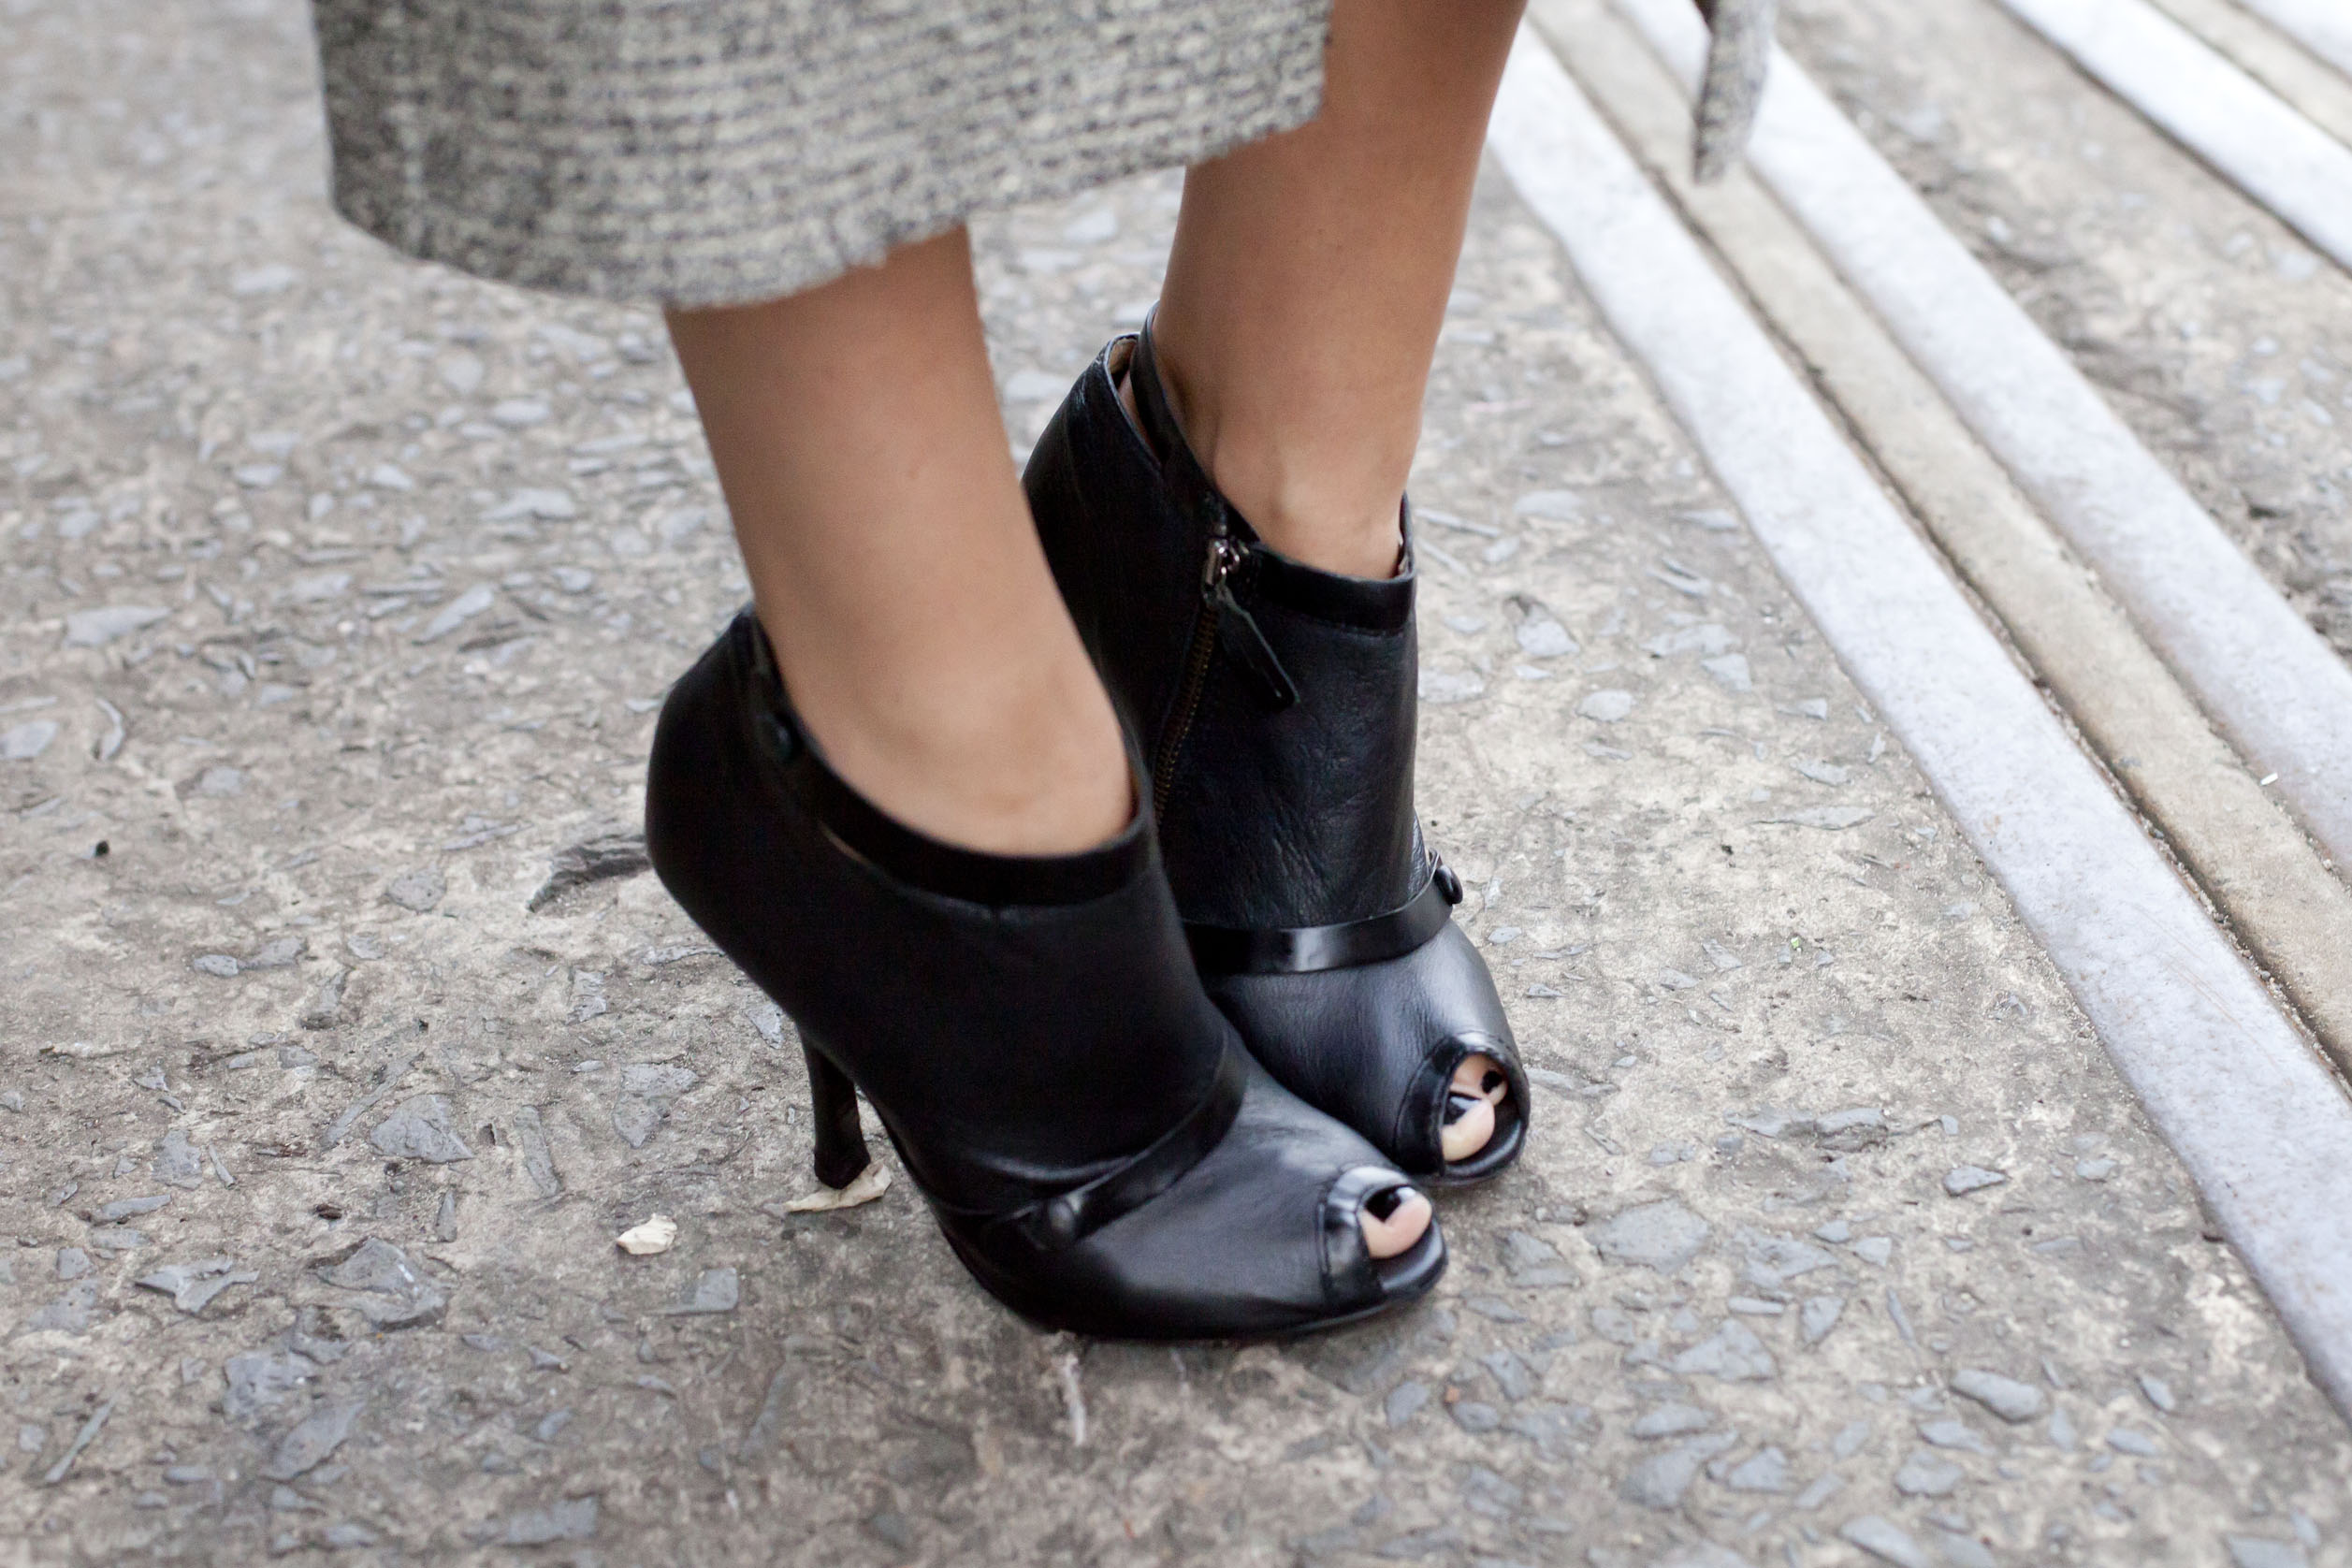 A woman from the shins down wearing black open-toe high heel boots.